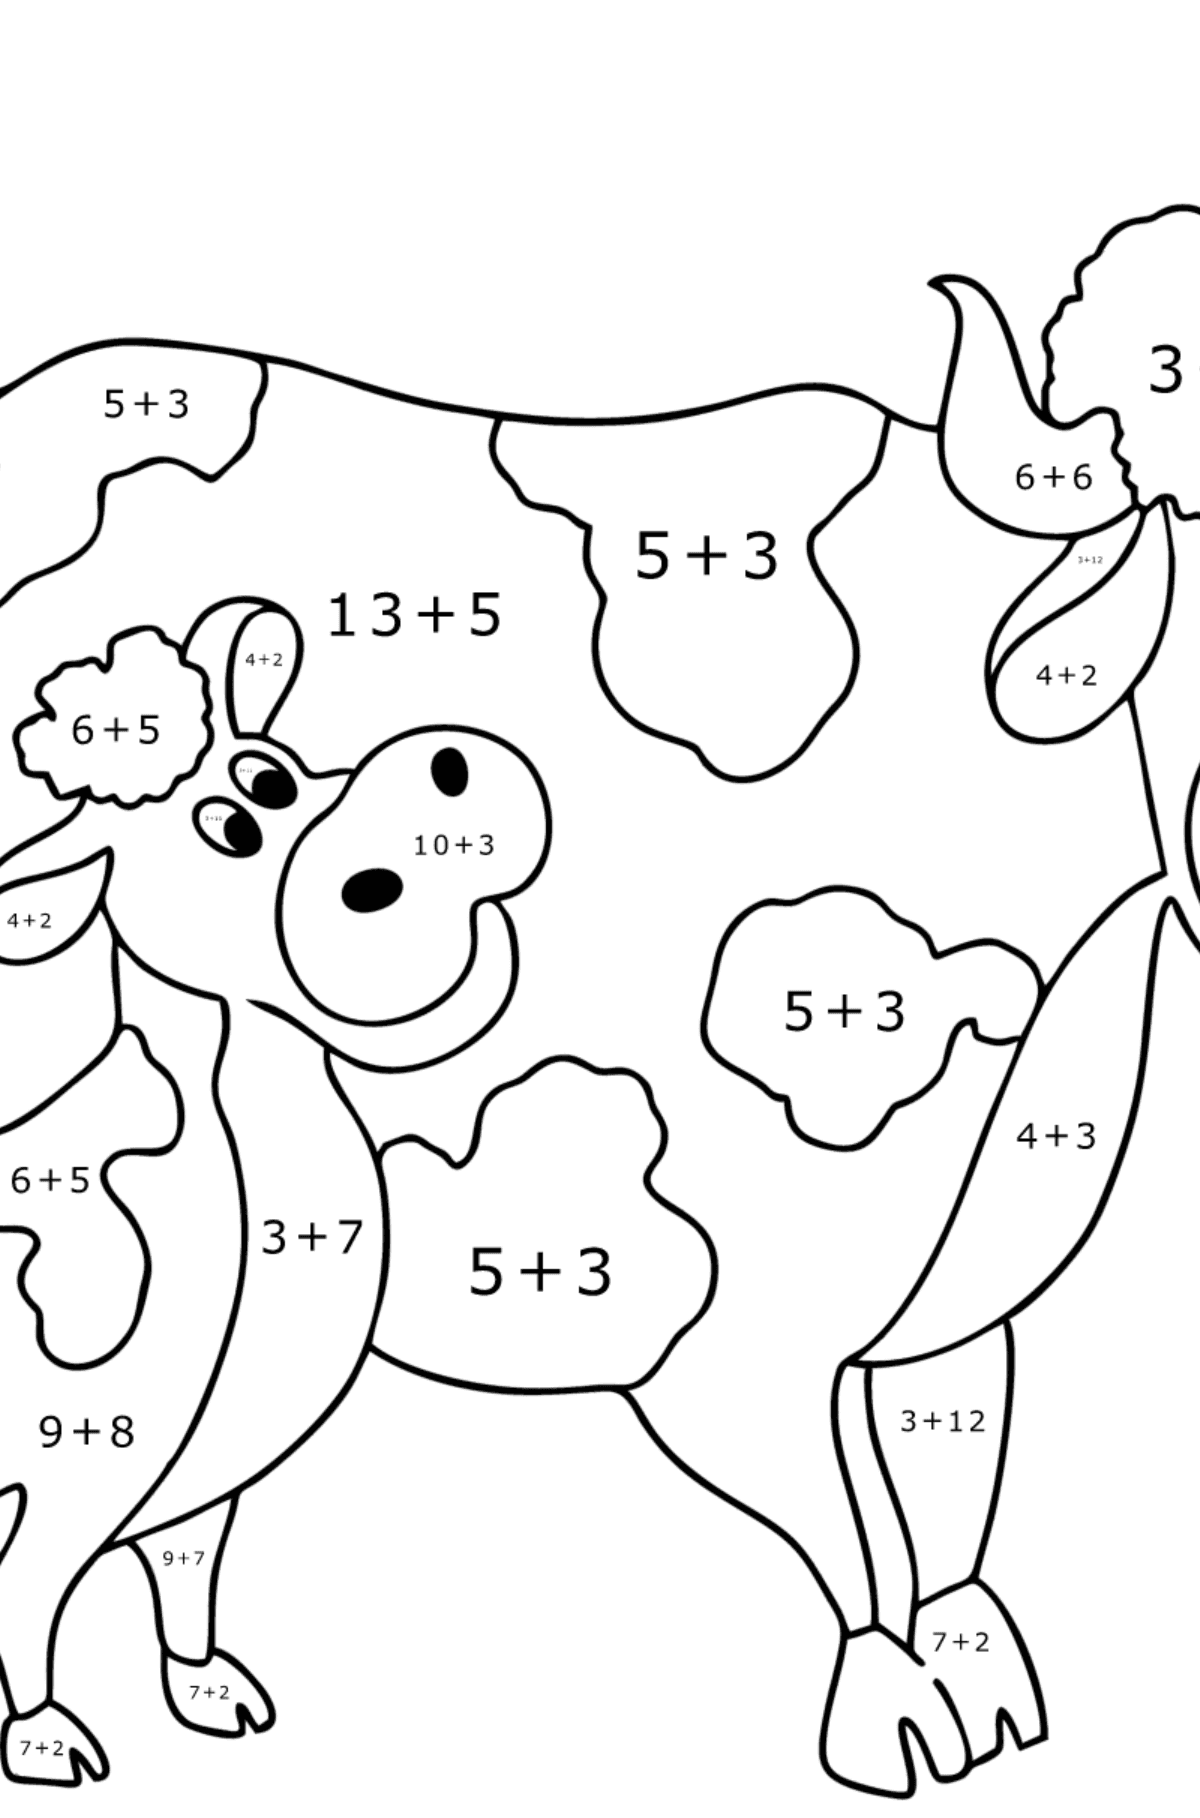 Cow and calf coloring pages - Math Coloring - Addition for Kids